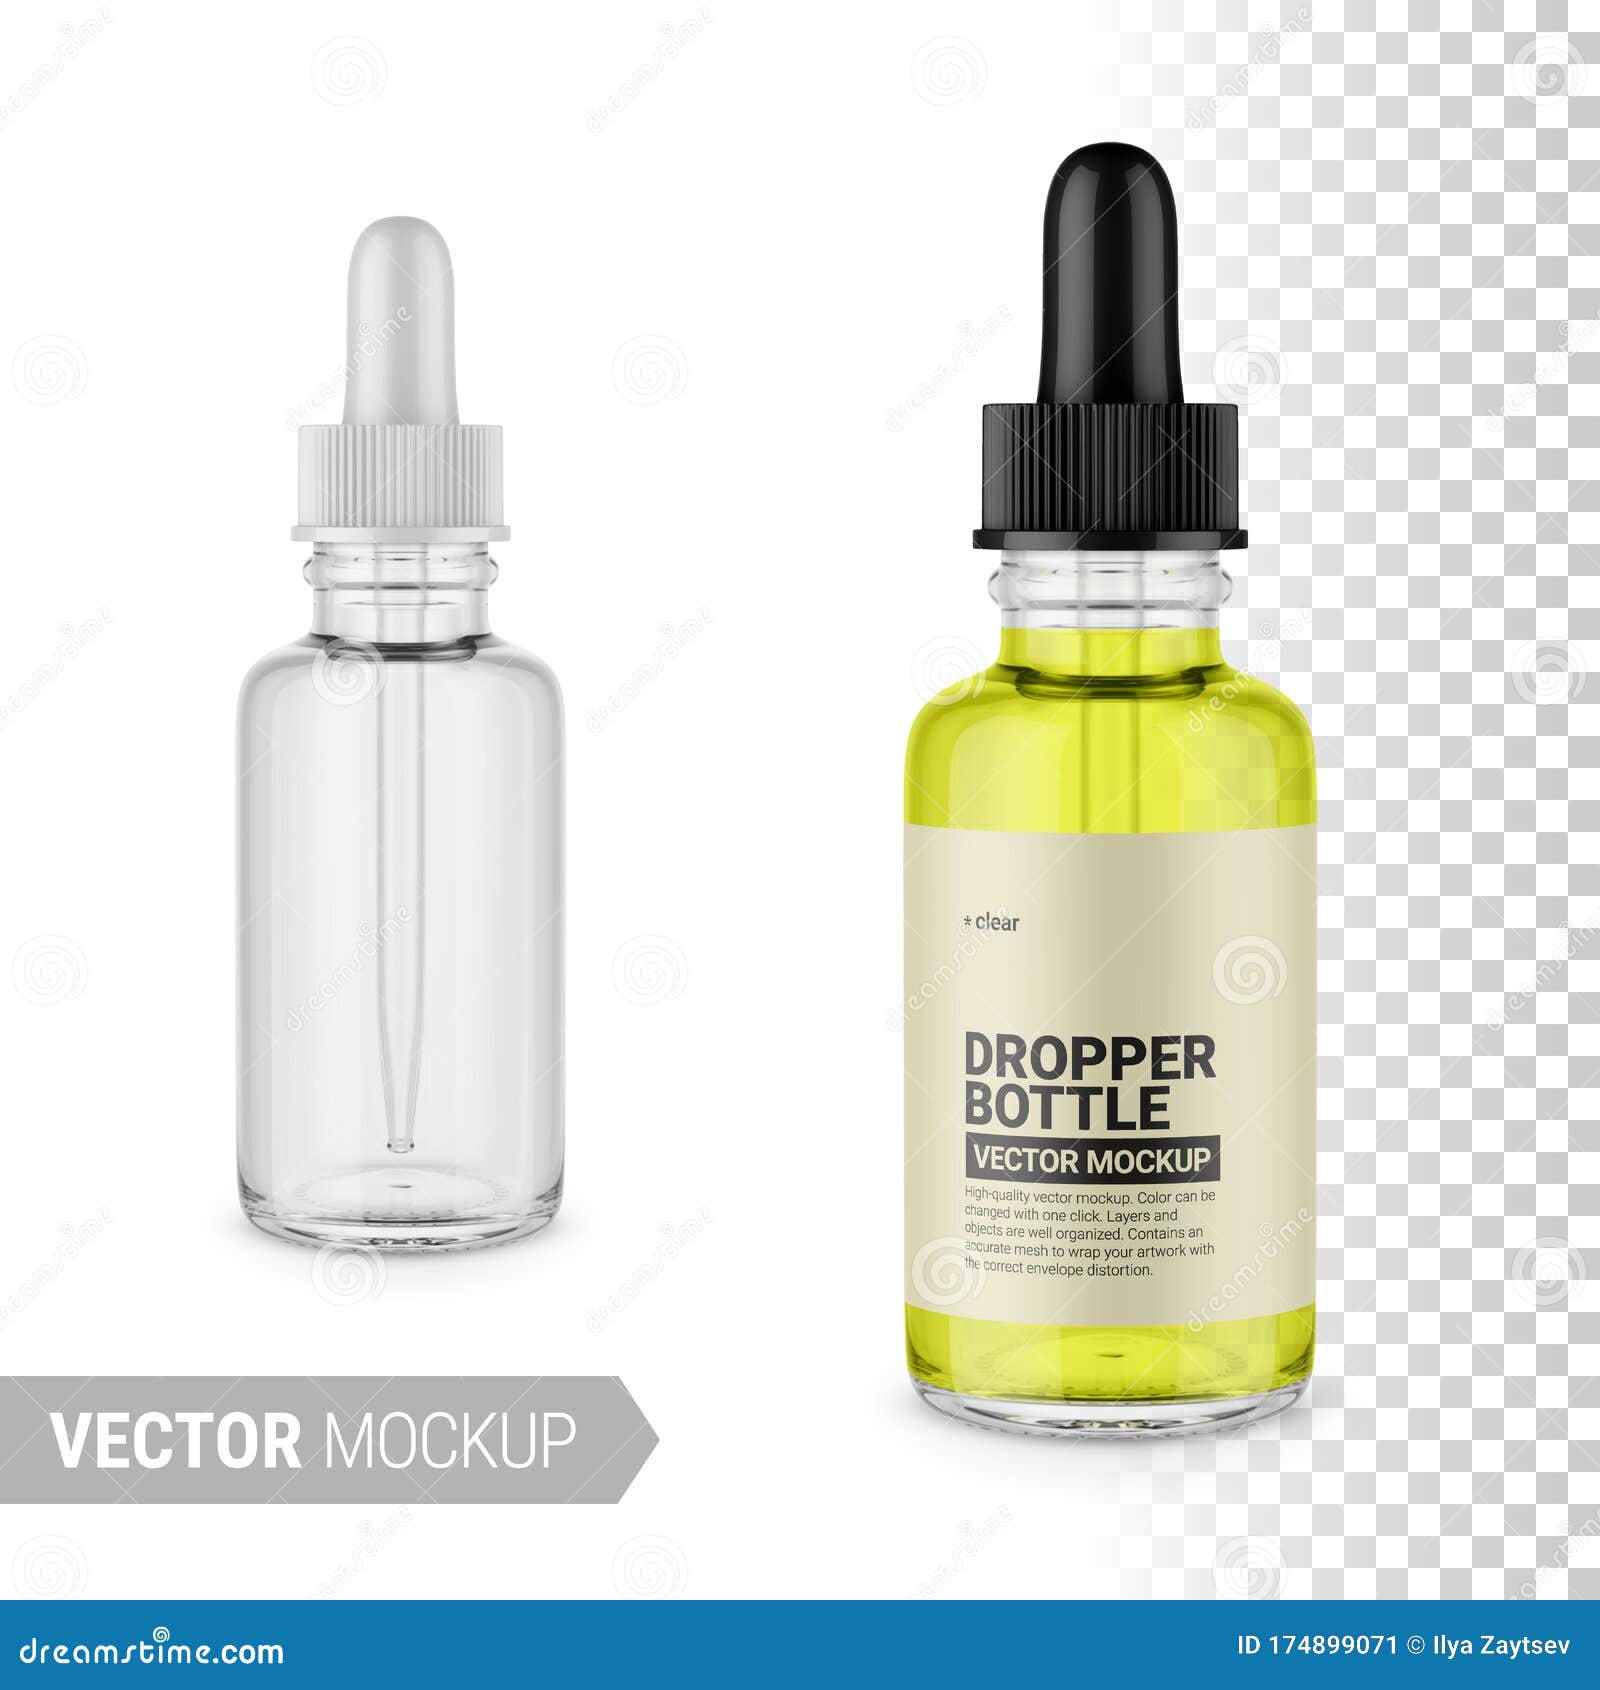 Download Clear Glass Dropper Bottle Mockup Vector Illustration Stock Illustration Illustration Of Container Bottle 174899071